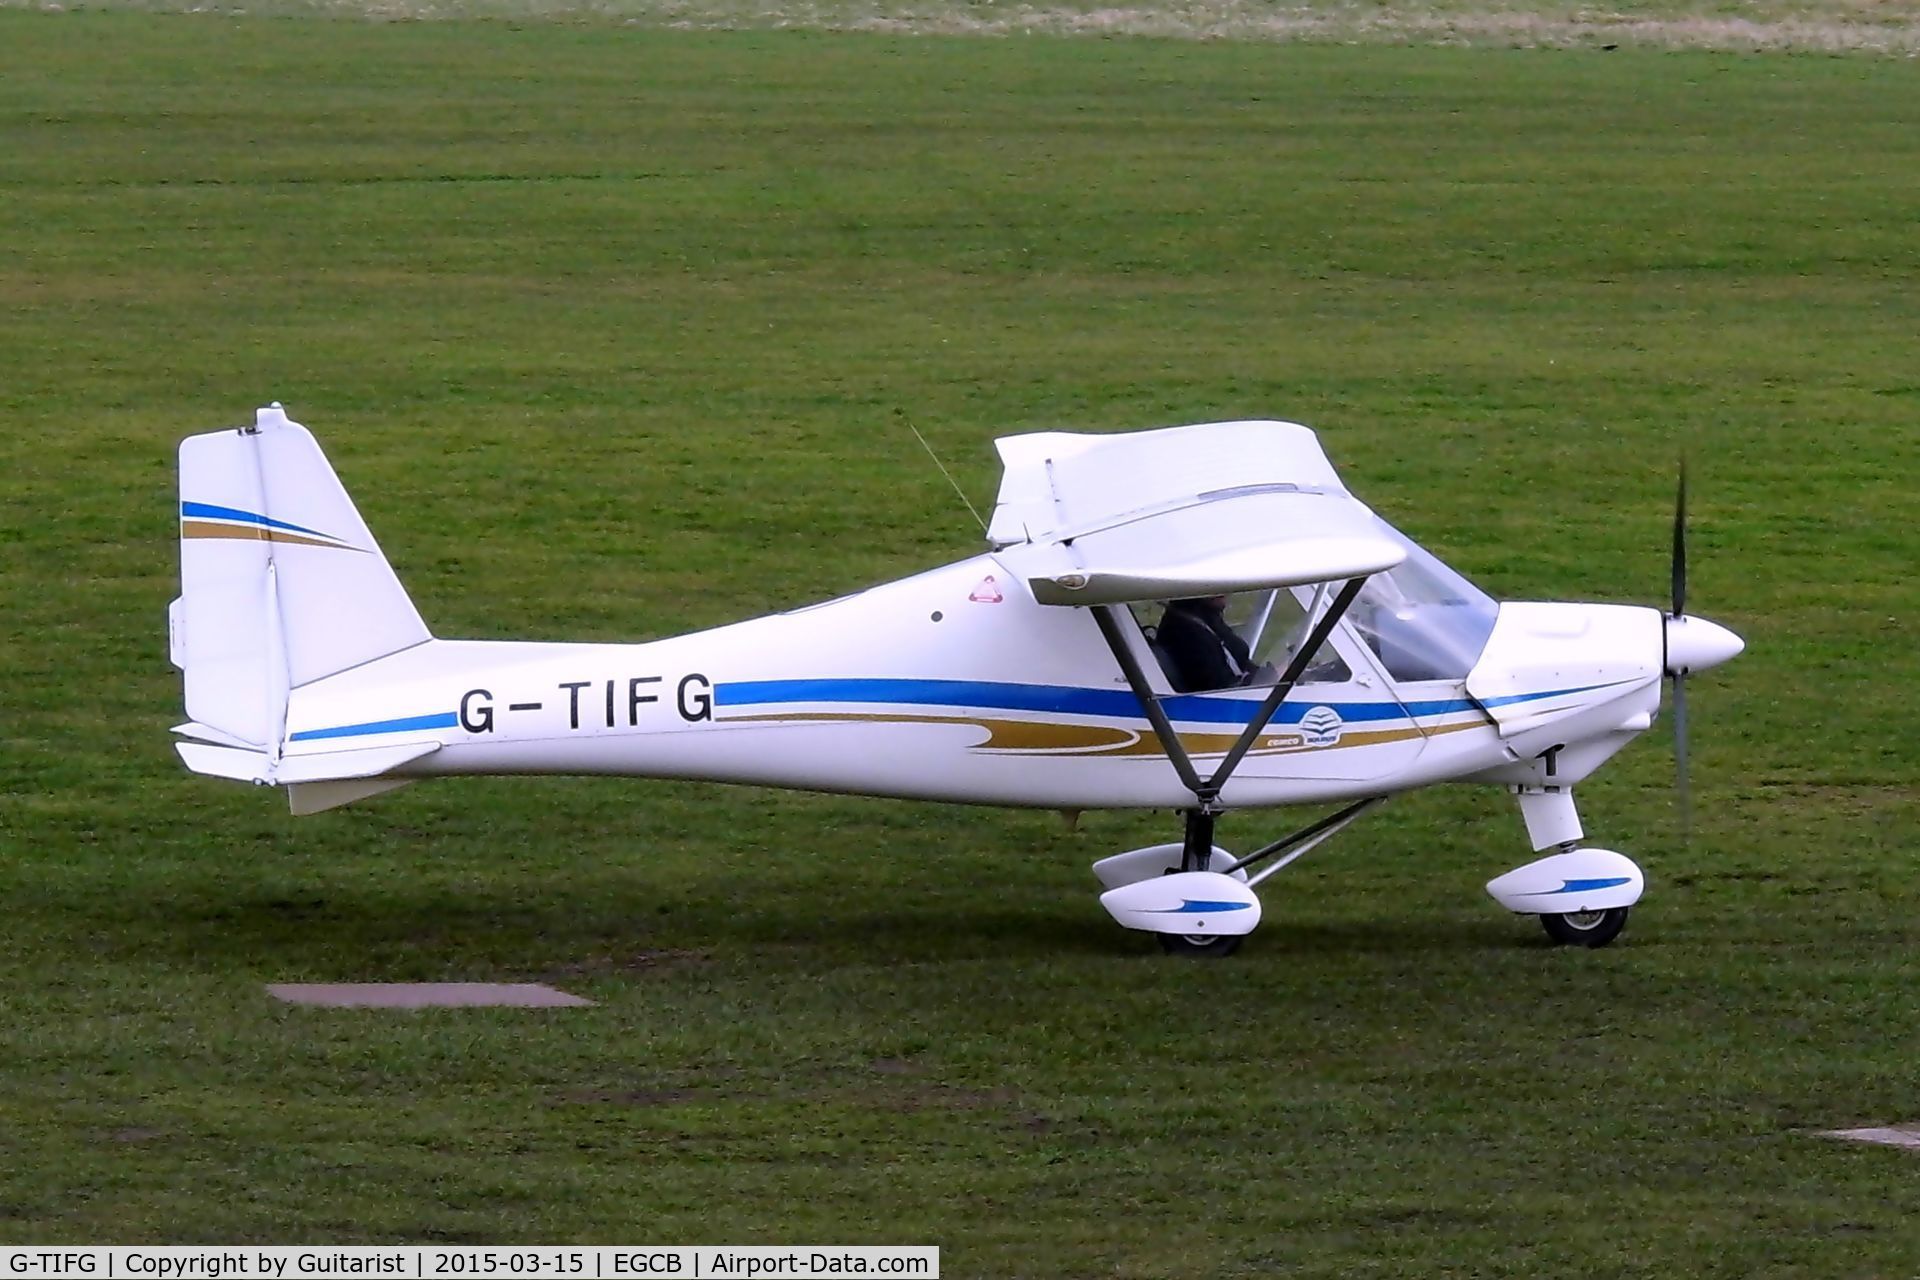 G-TIFG, 2010 Comco Ikarus C42 FB80 C/N 1009-7119, City Airport Manchester